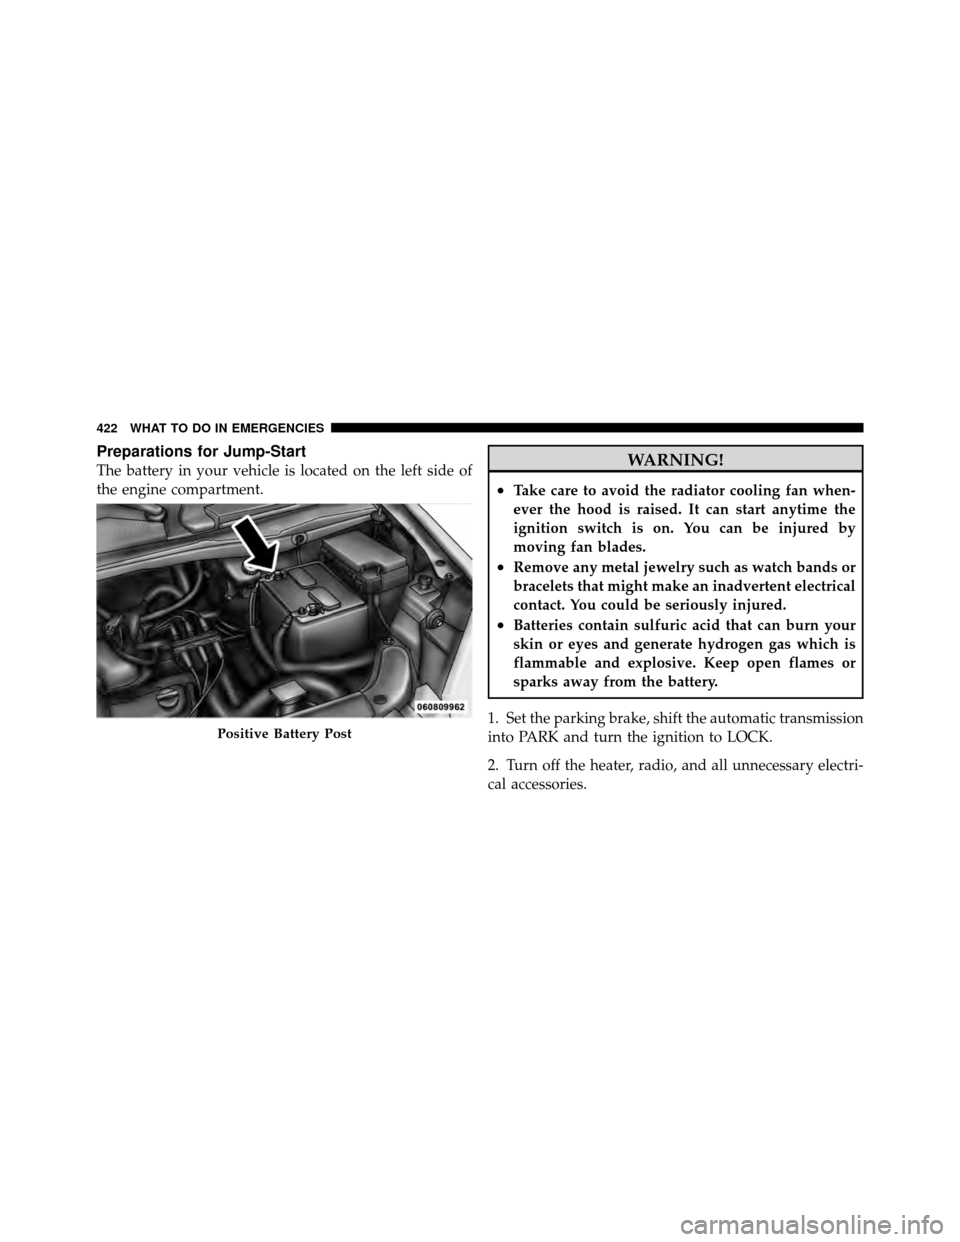 DODGE GRAND CARAVAN 2010 5.G Owners Manual 
Preparations for Jump-Start
The battery in your vehicle is located on the left side of
the engine compartment.WARNING!
•Take care to avoid the radiator cooling fan when-
ever the hood is raised. It